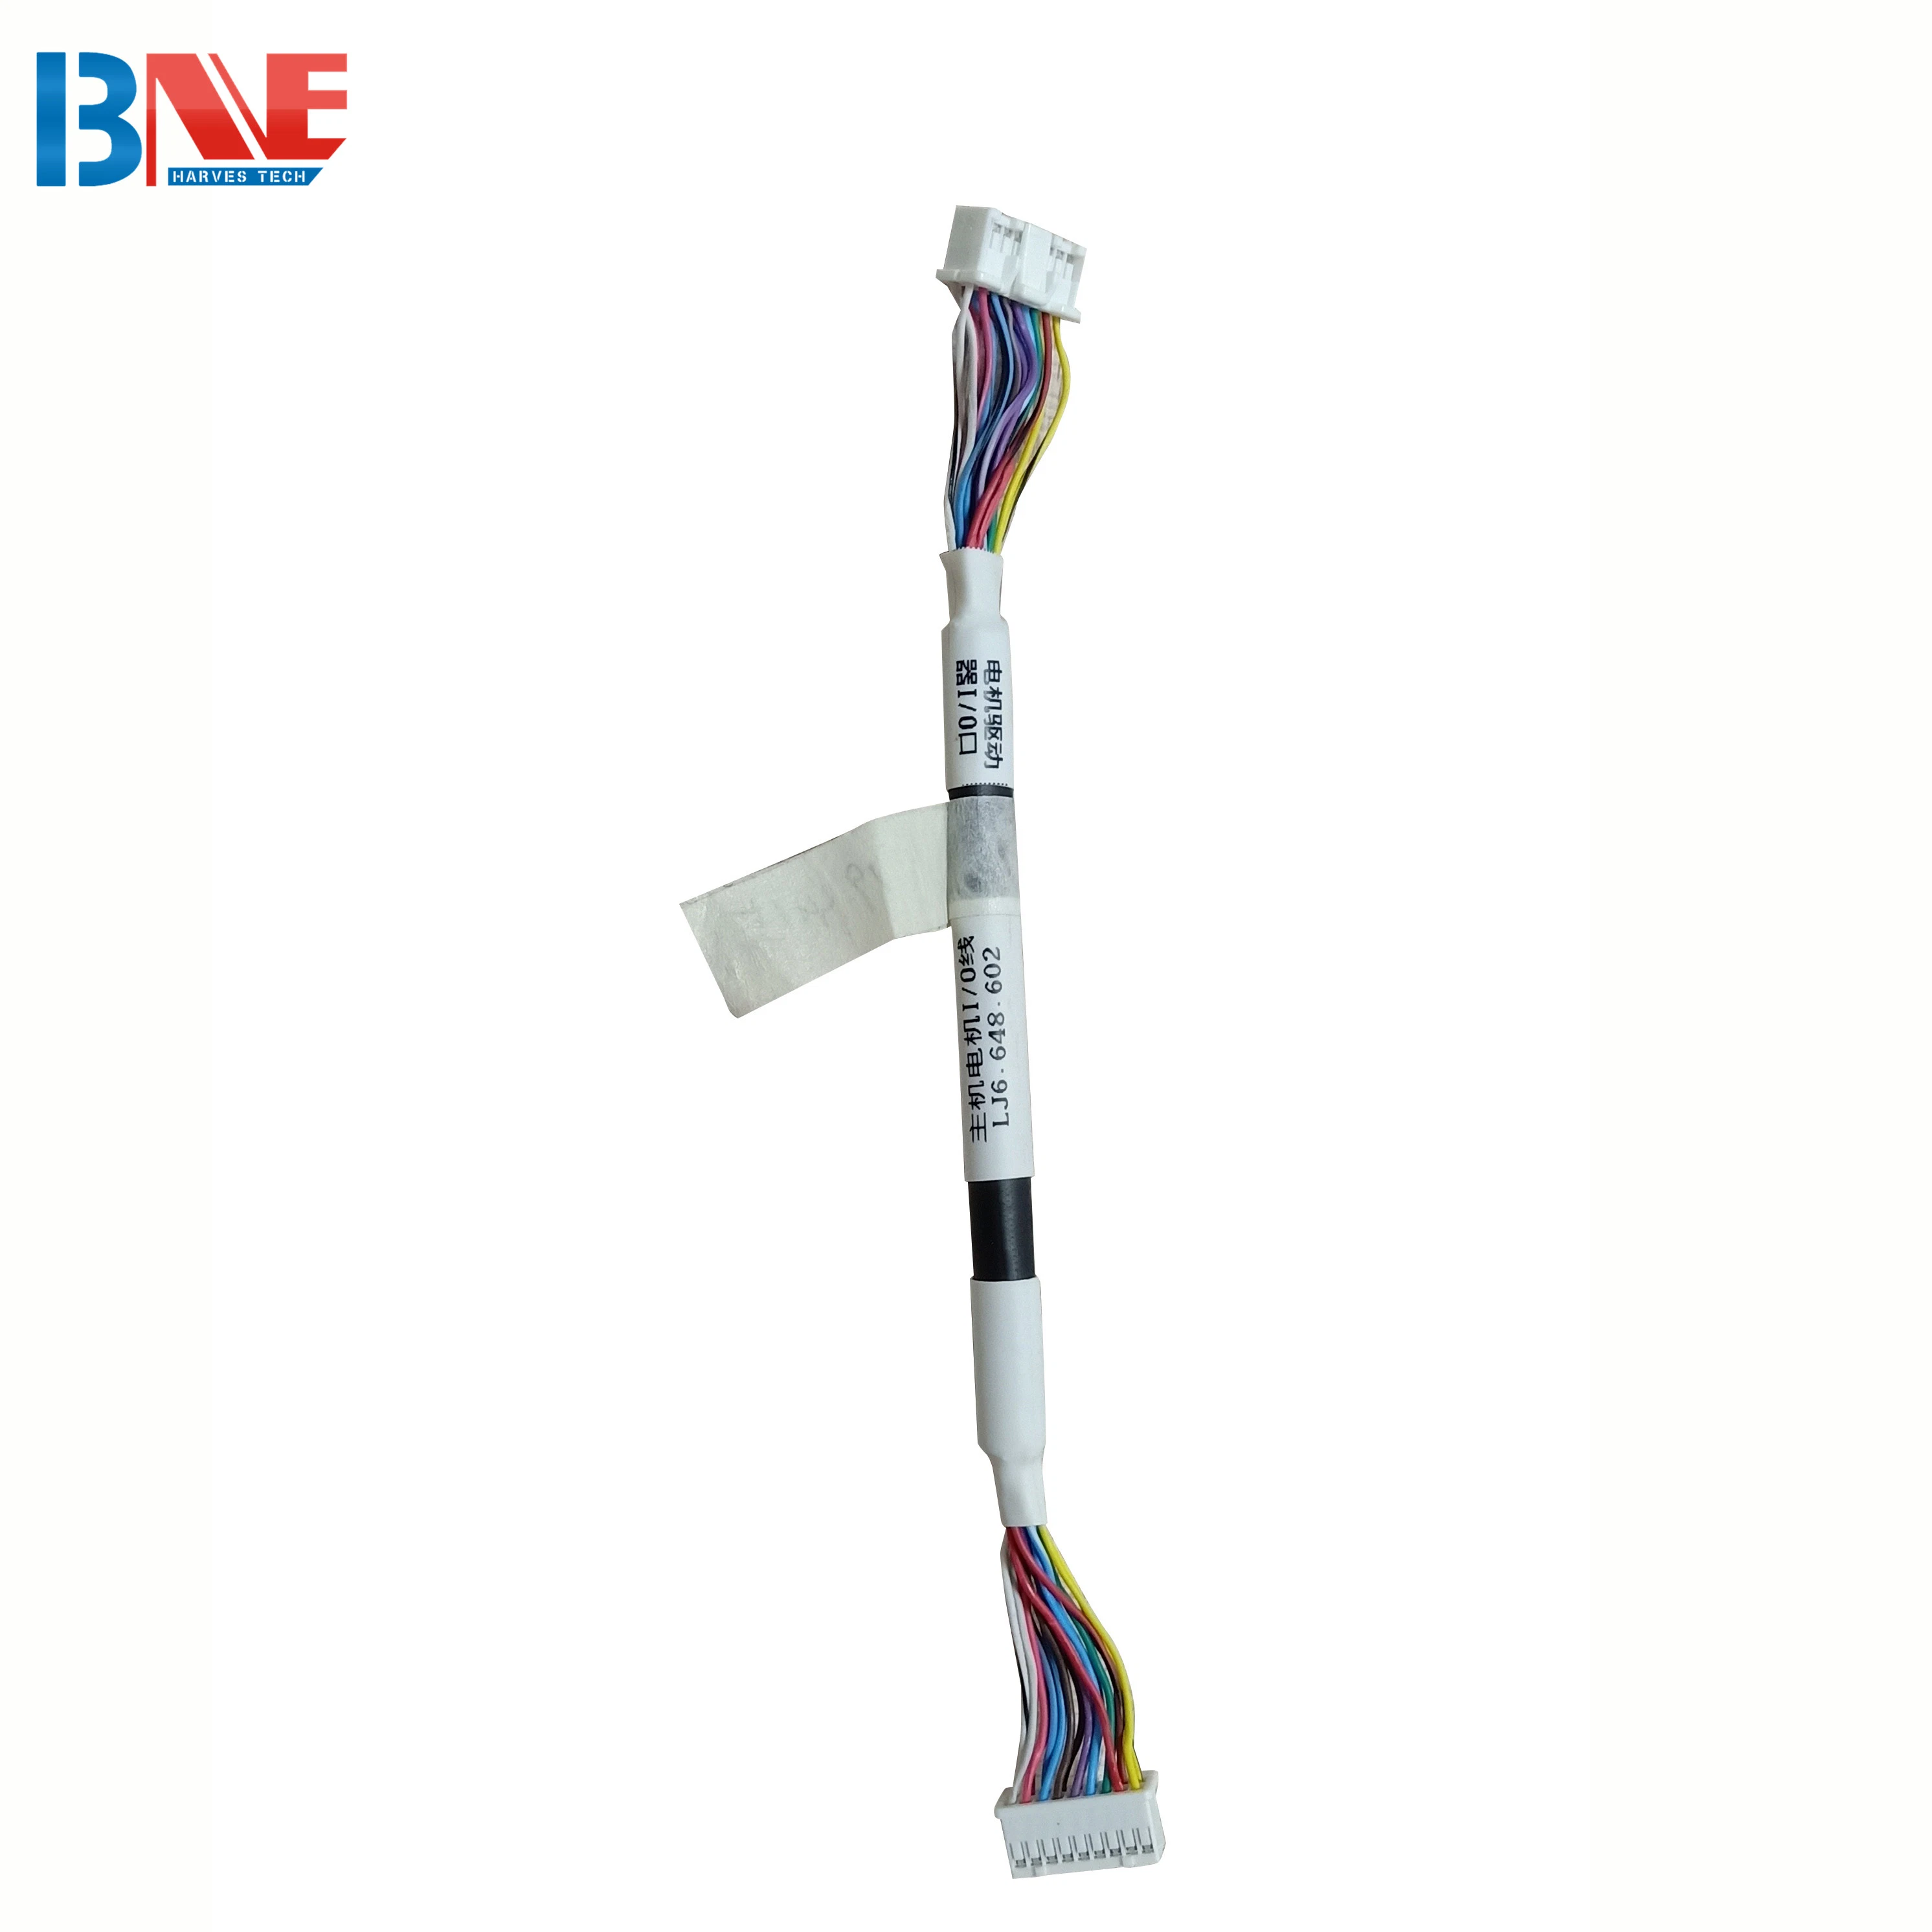 Wholesale/Supplier Industrial Electronic Molex Jst Jae Hirose Ipex AMP Power Cable Assembly Wire Harness